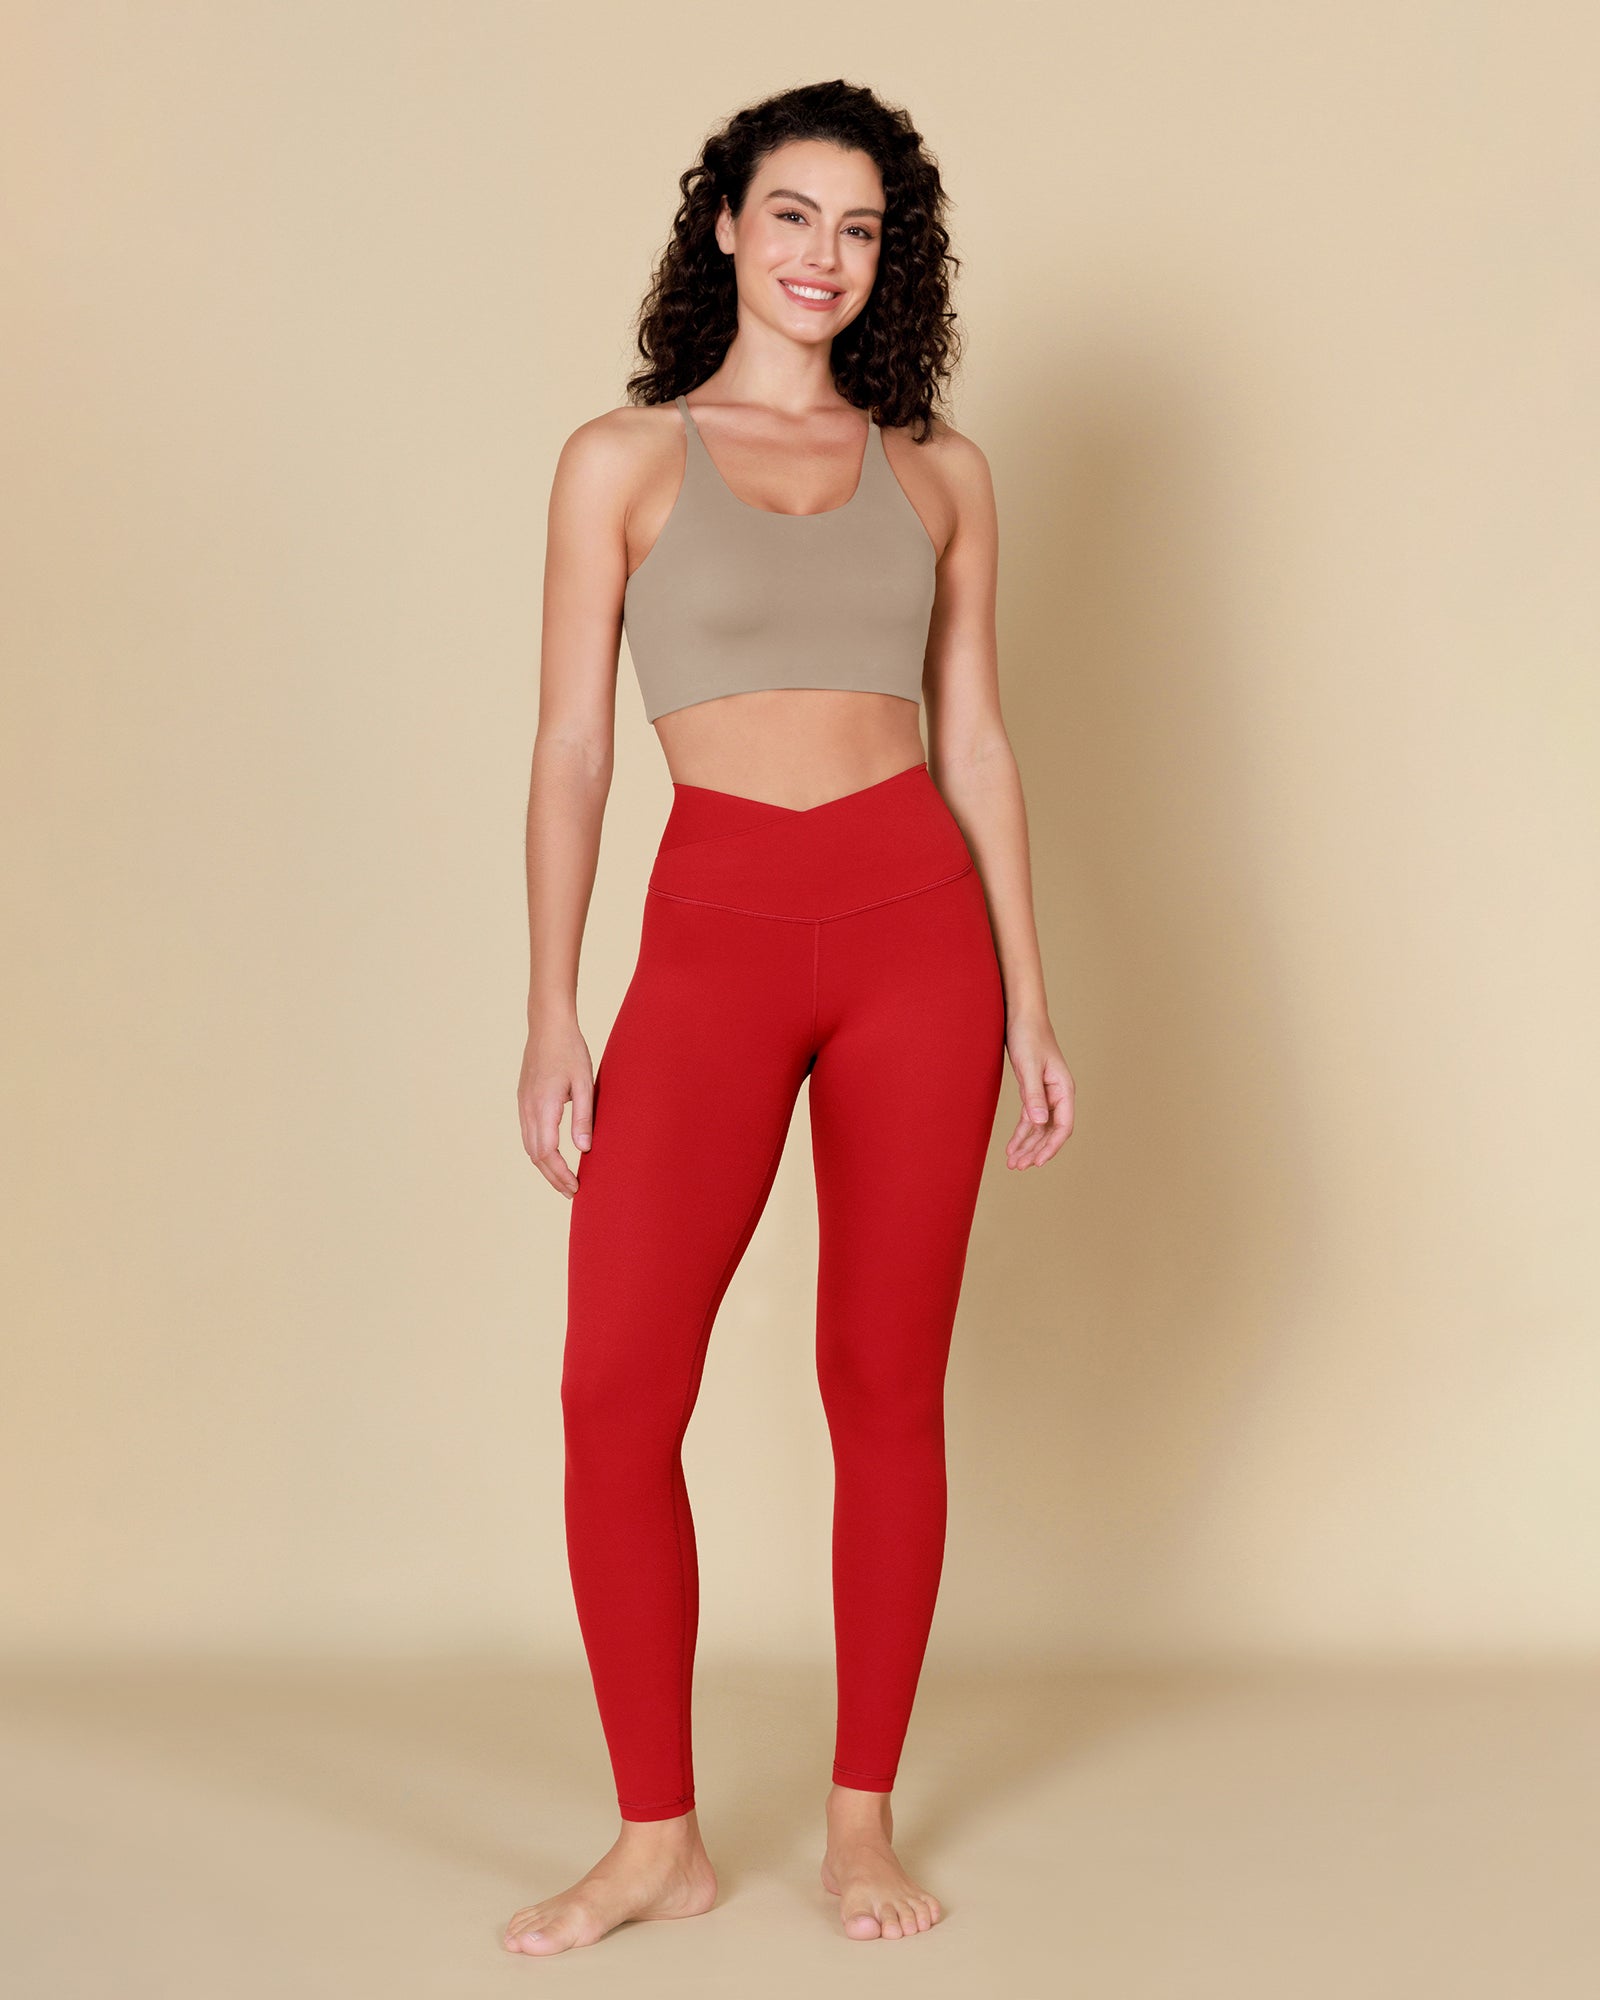 ODCLOUD Crossover 28" Leggings with Back Pocket - Limited Colors Red - ododos